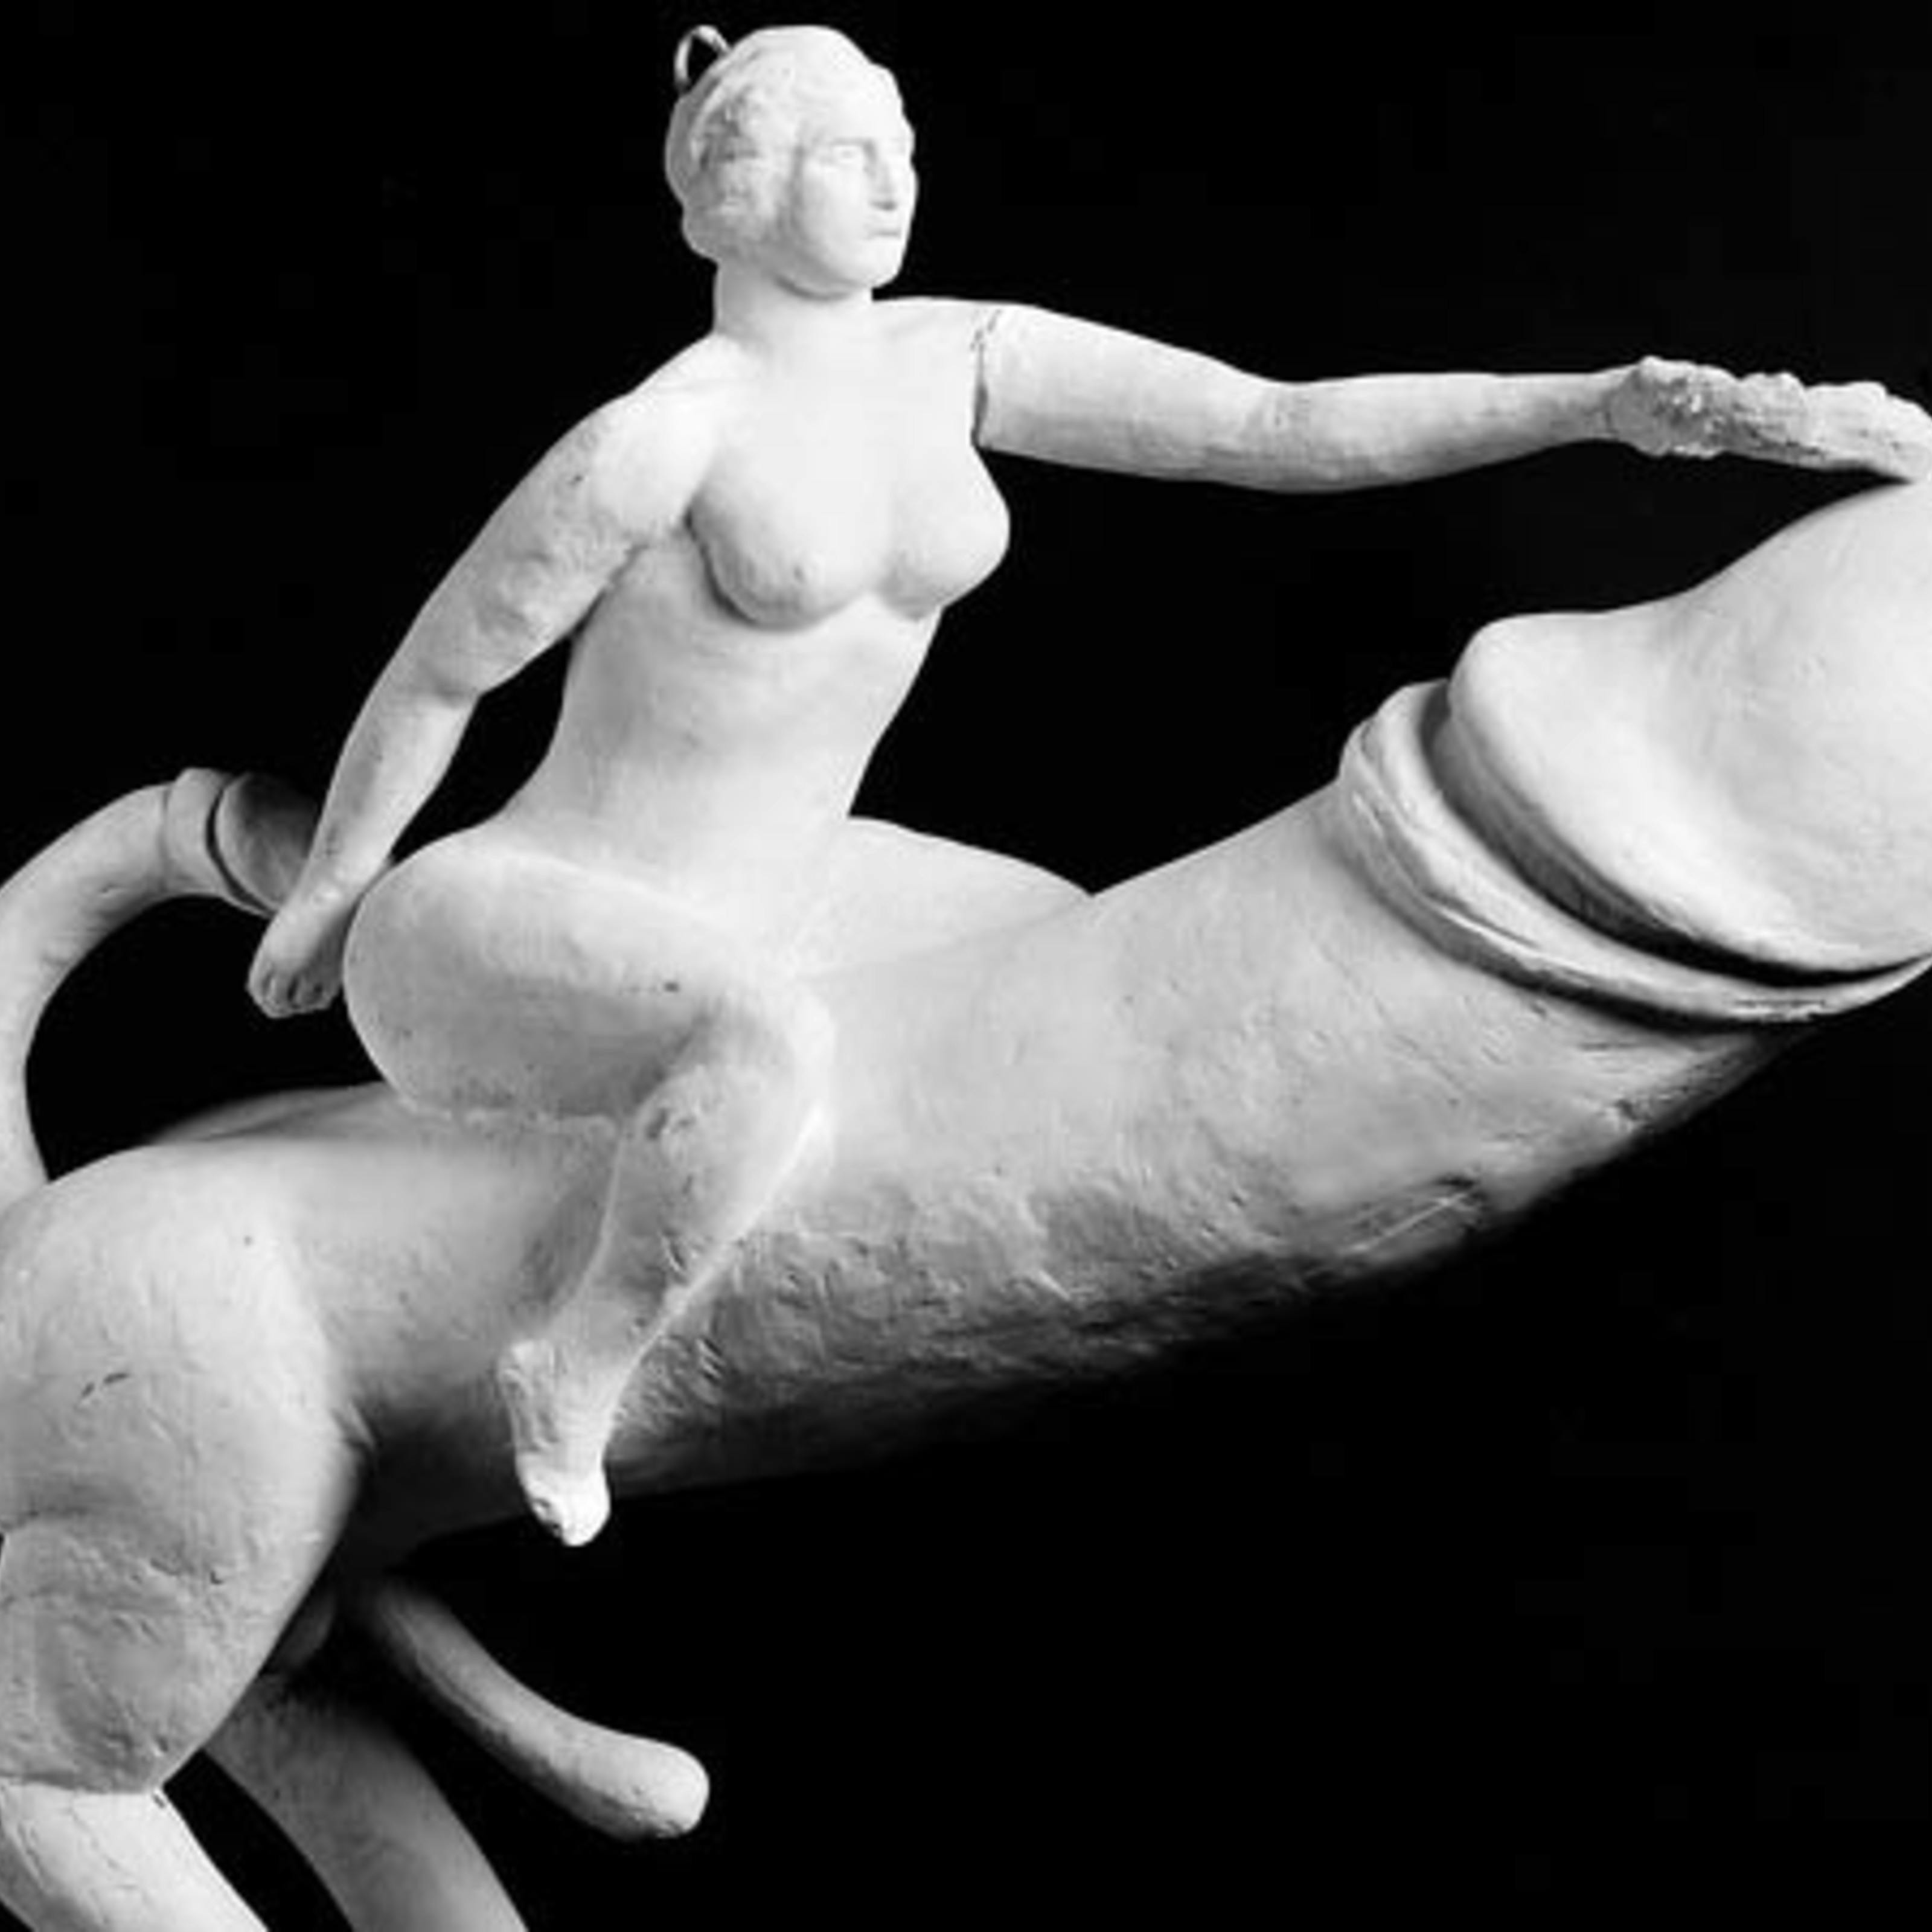 Image of a white plaster cast phallic object showing a woman astride a giant penis.